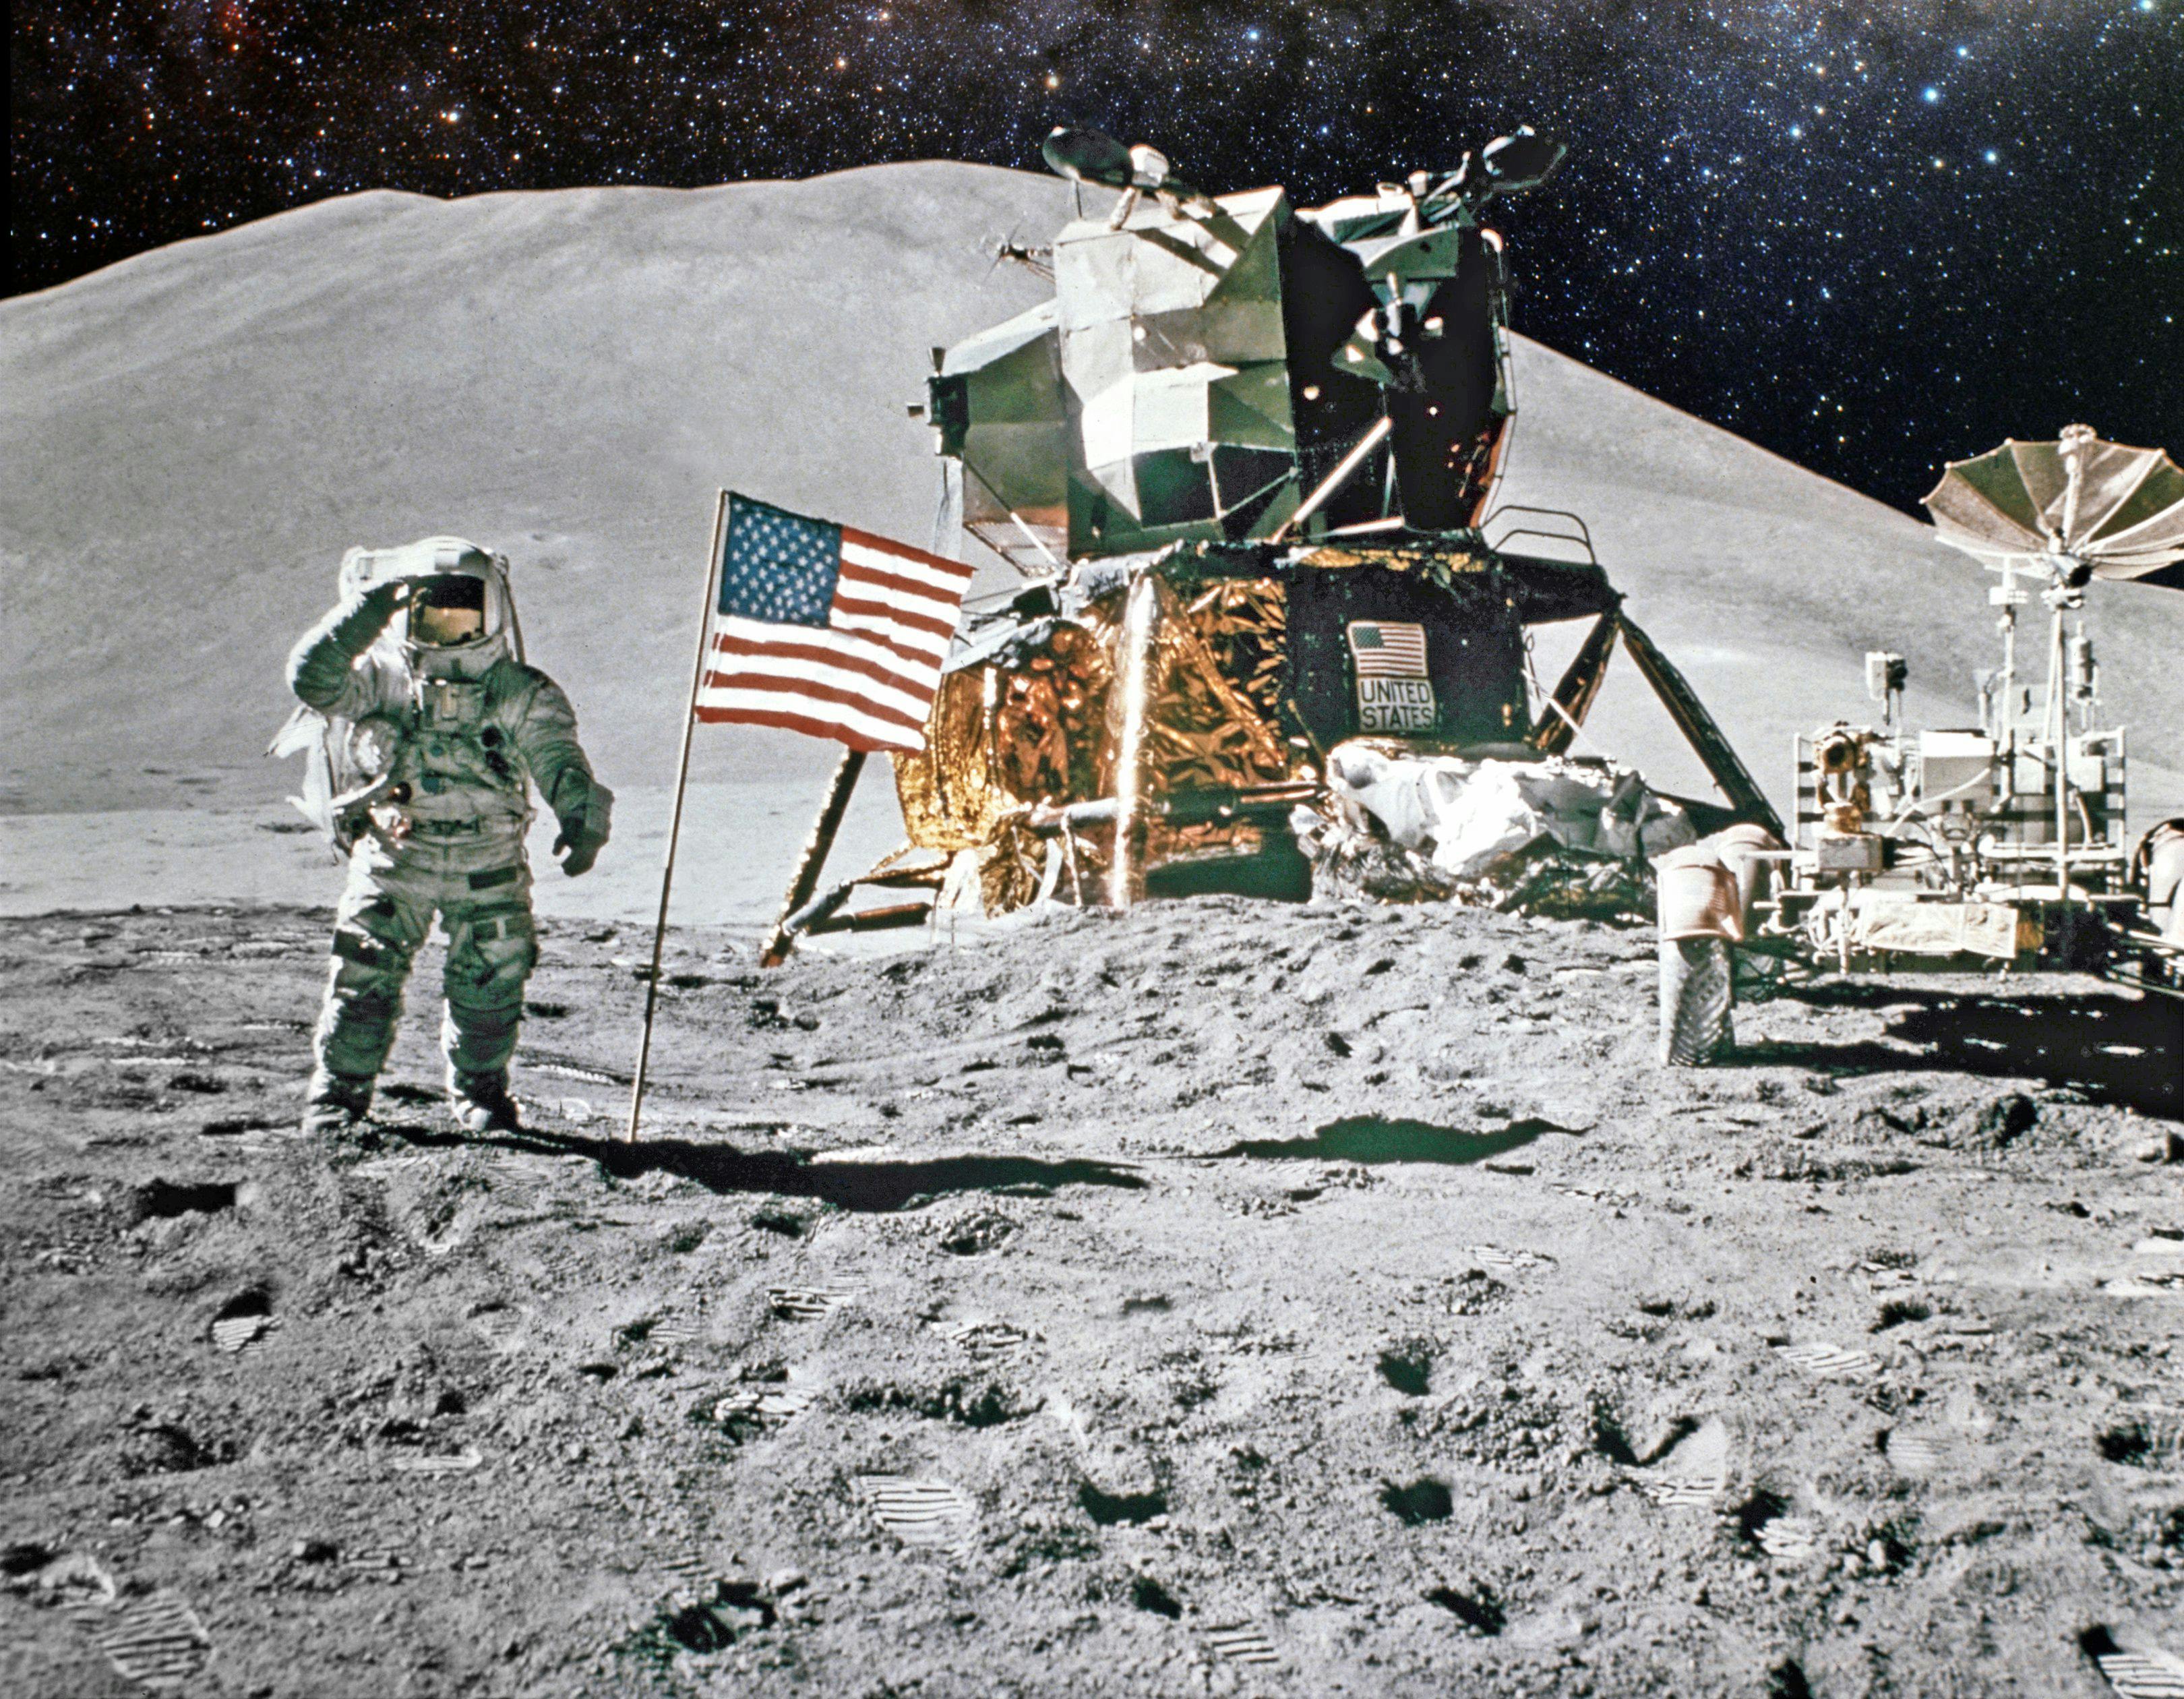 Astronaut on lunar (moon) landing mission. Elements of this image furnished by NASA. | Image Credit: © Skyelar - stock.adobe.com